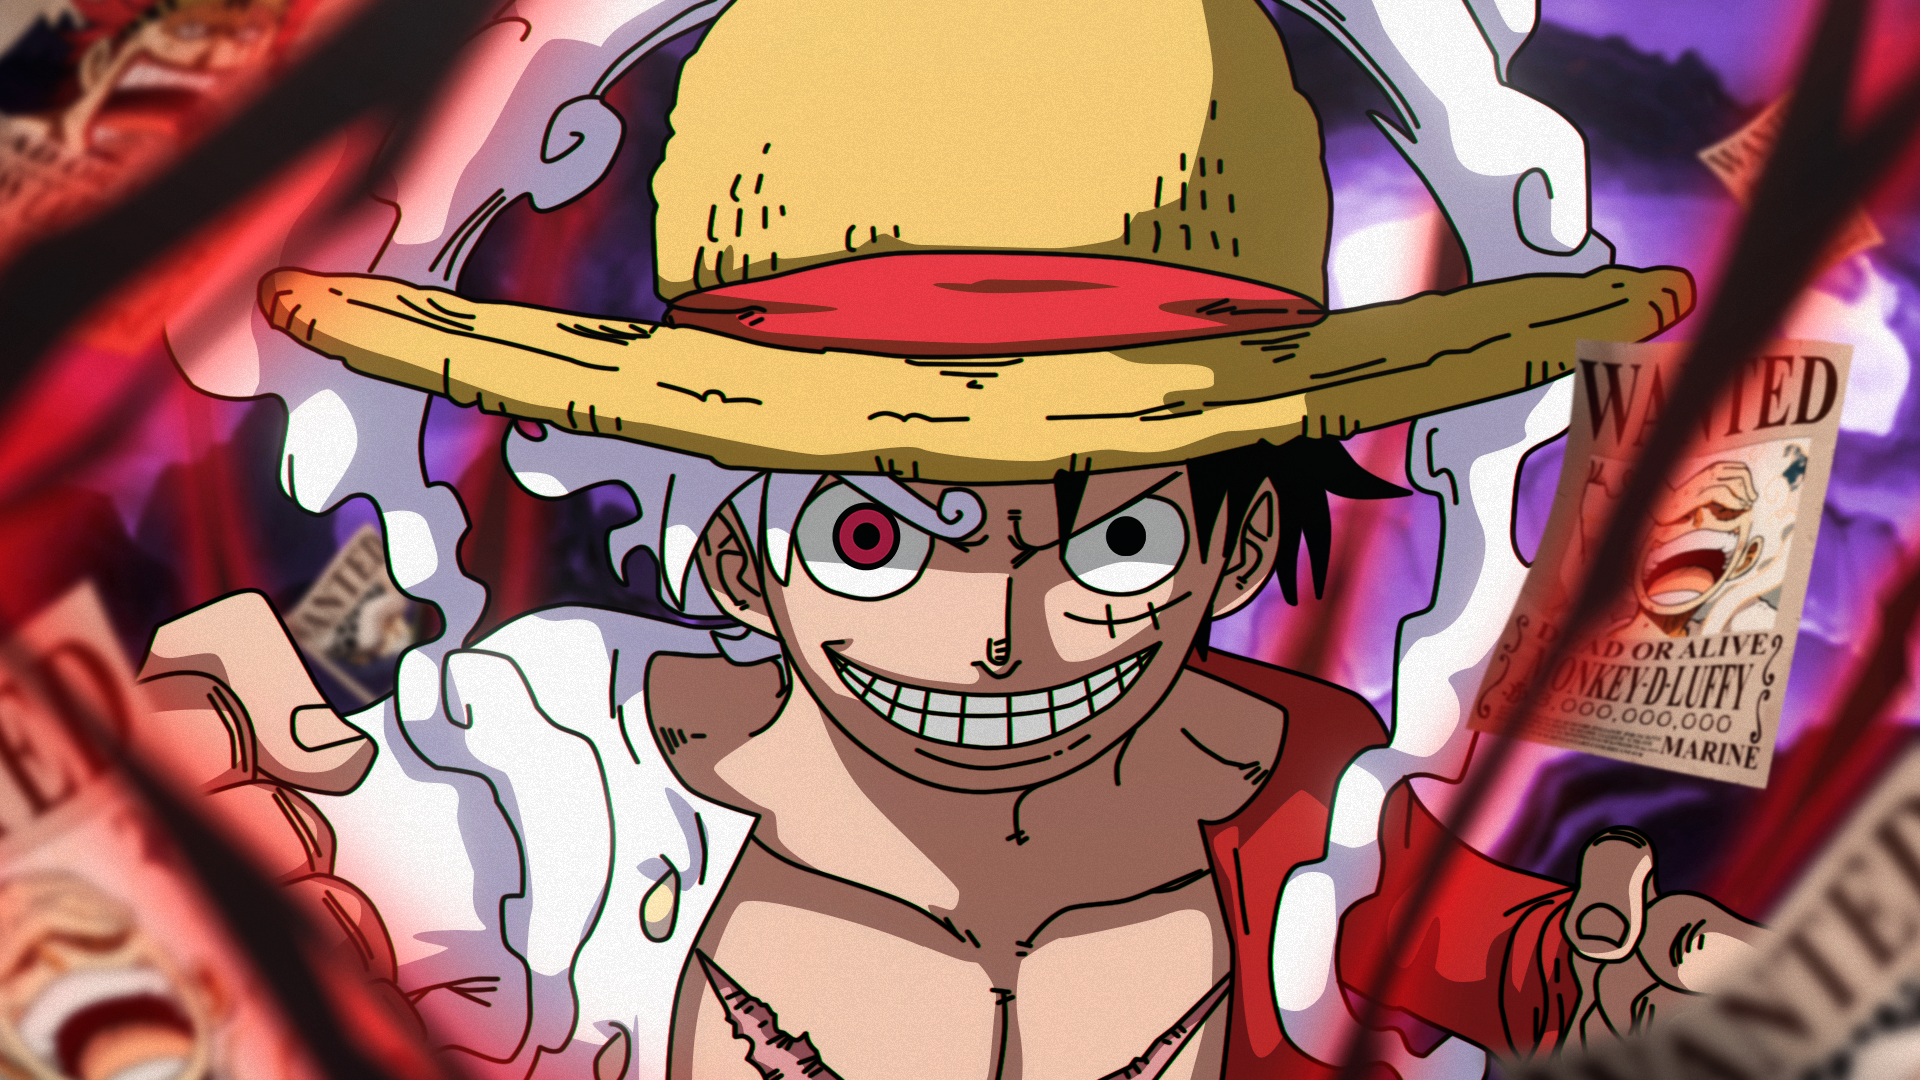 Download Luffy PNG File HD HQ PNG Image